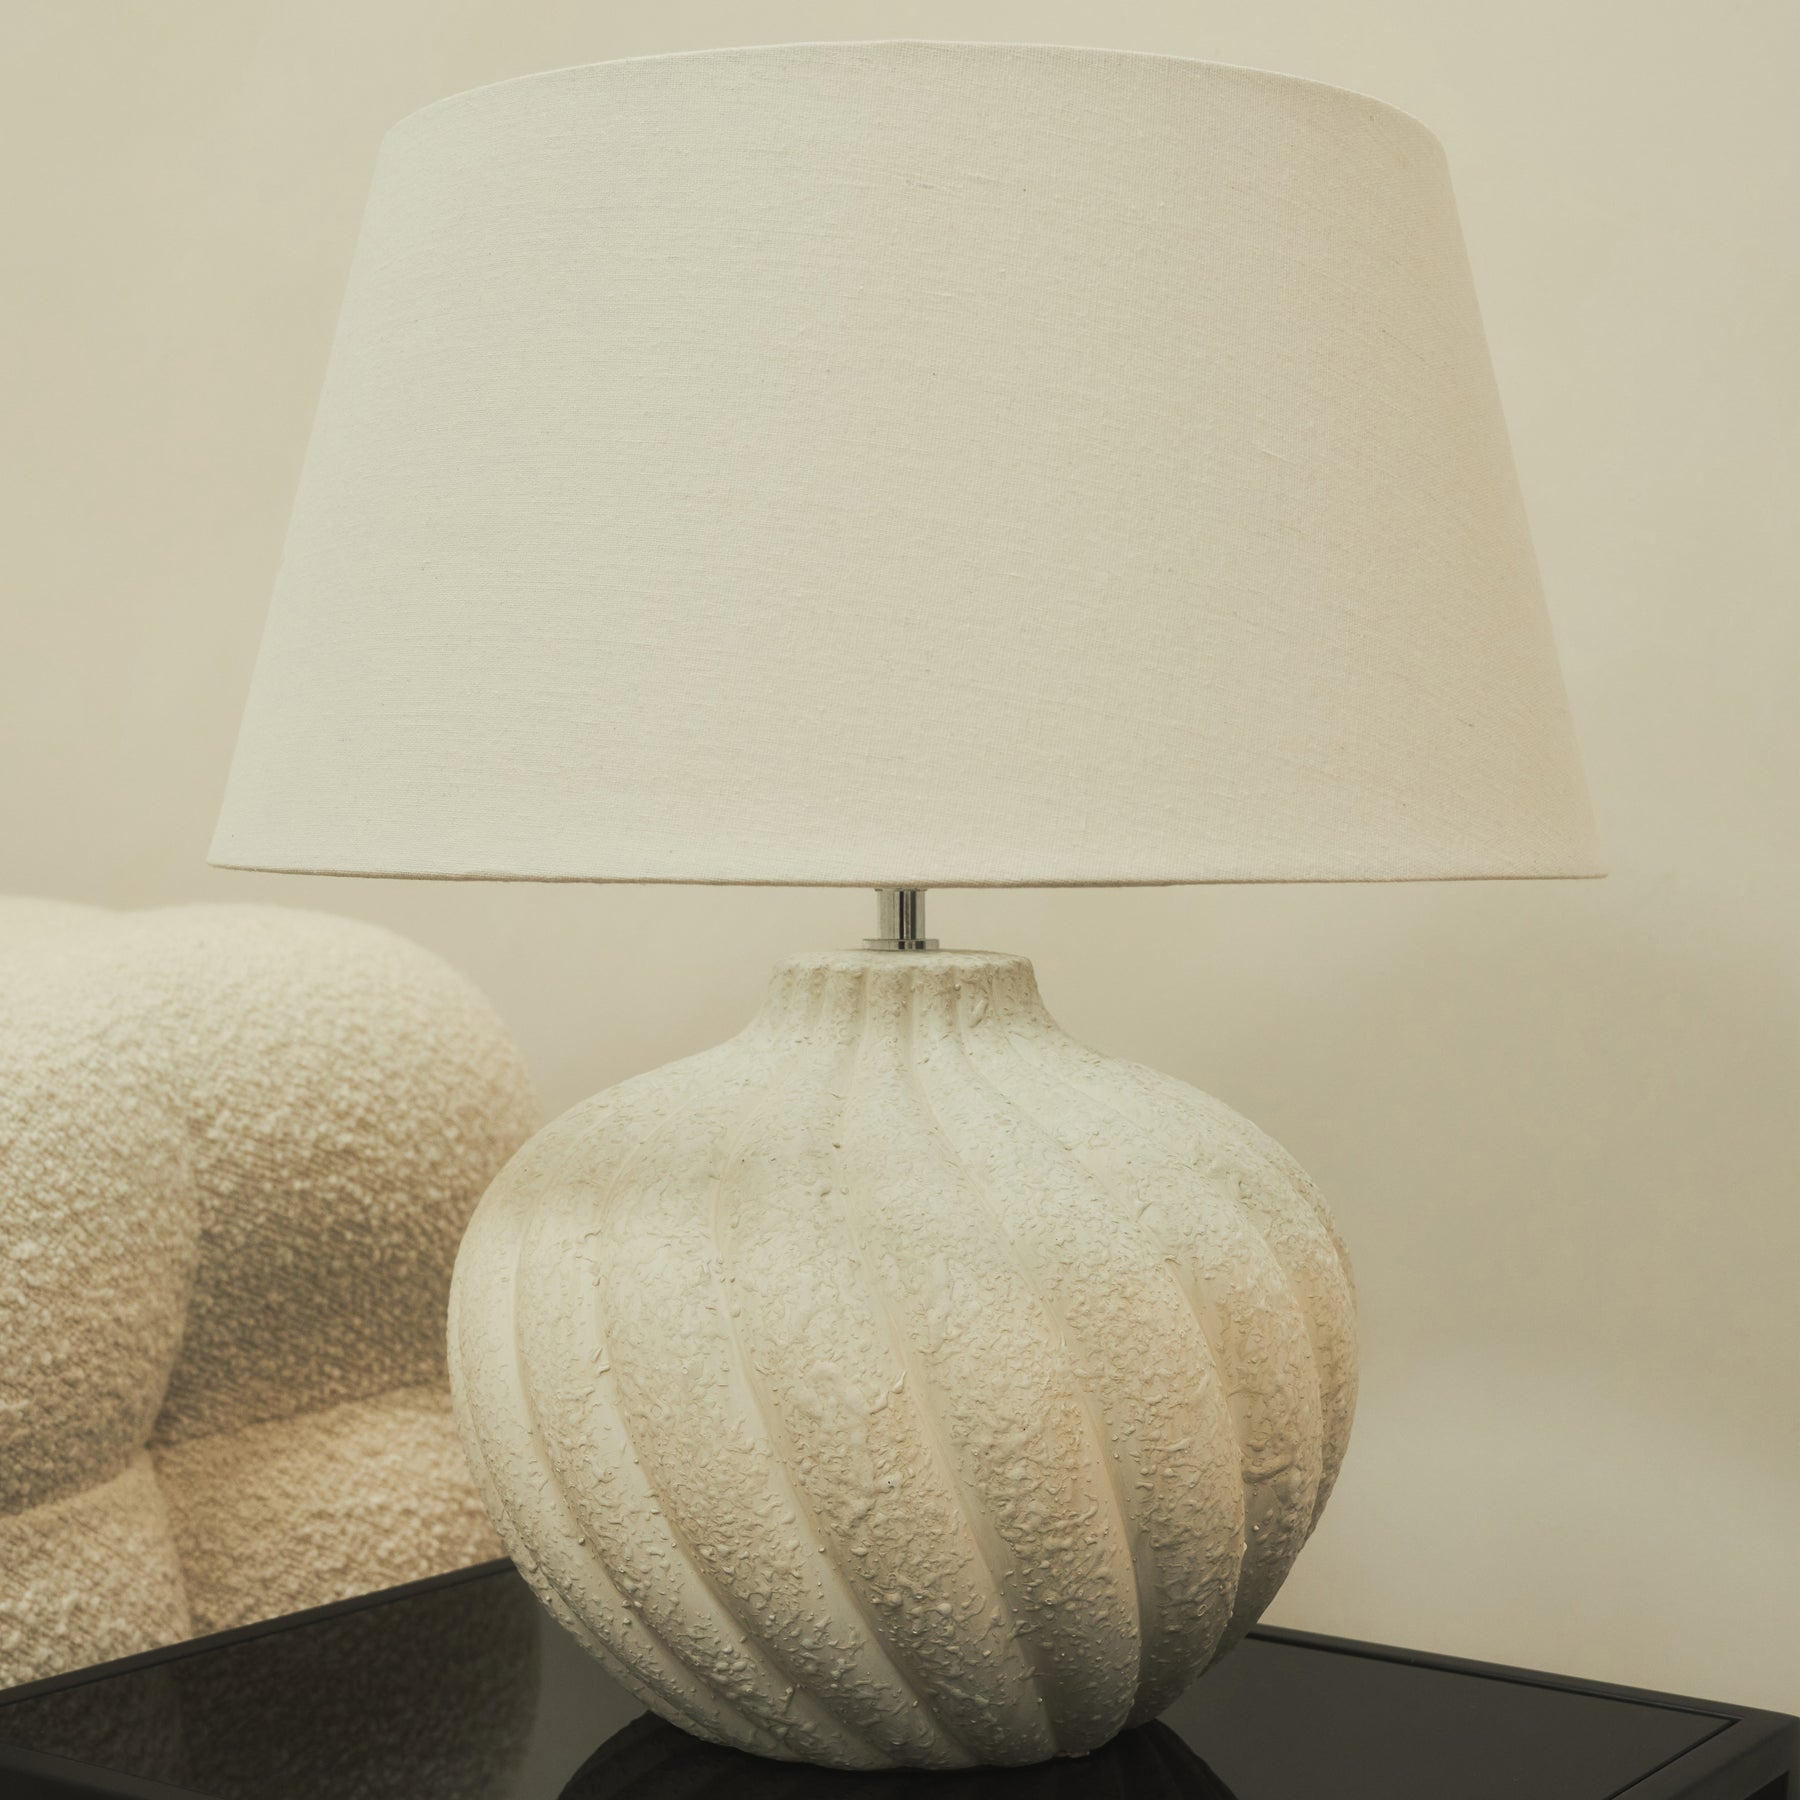 Textured ceramic based table lamp natural shade on brooklyn table